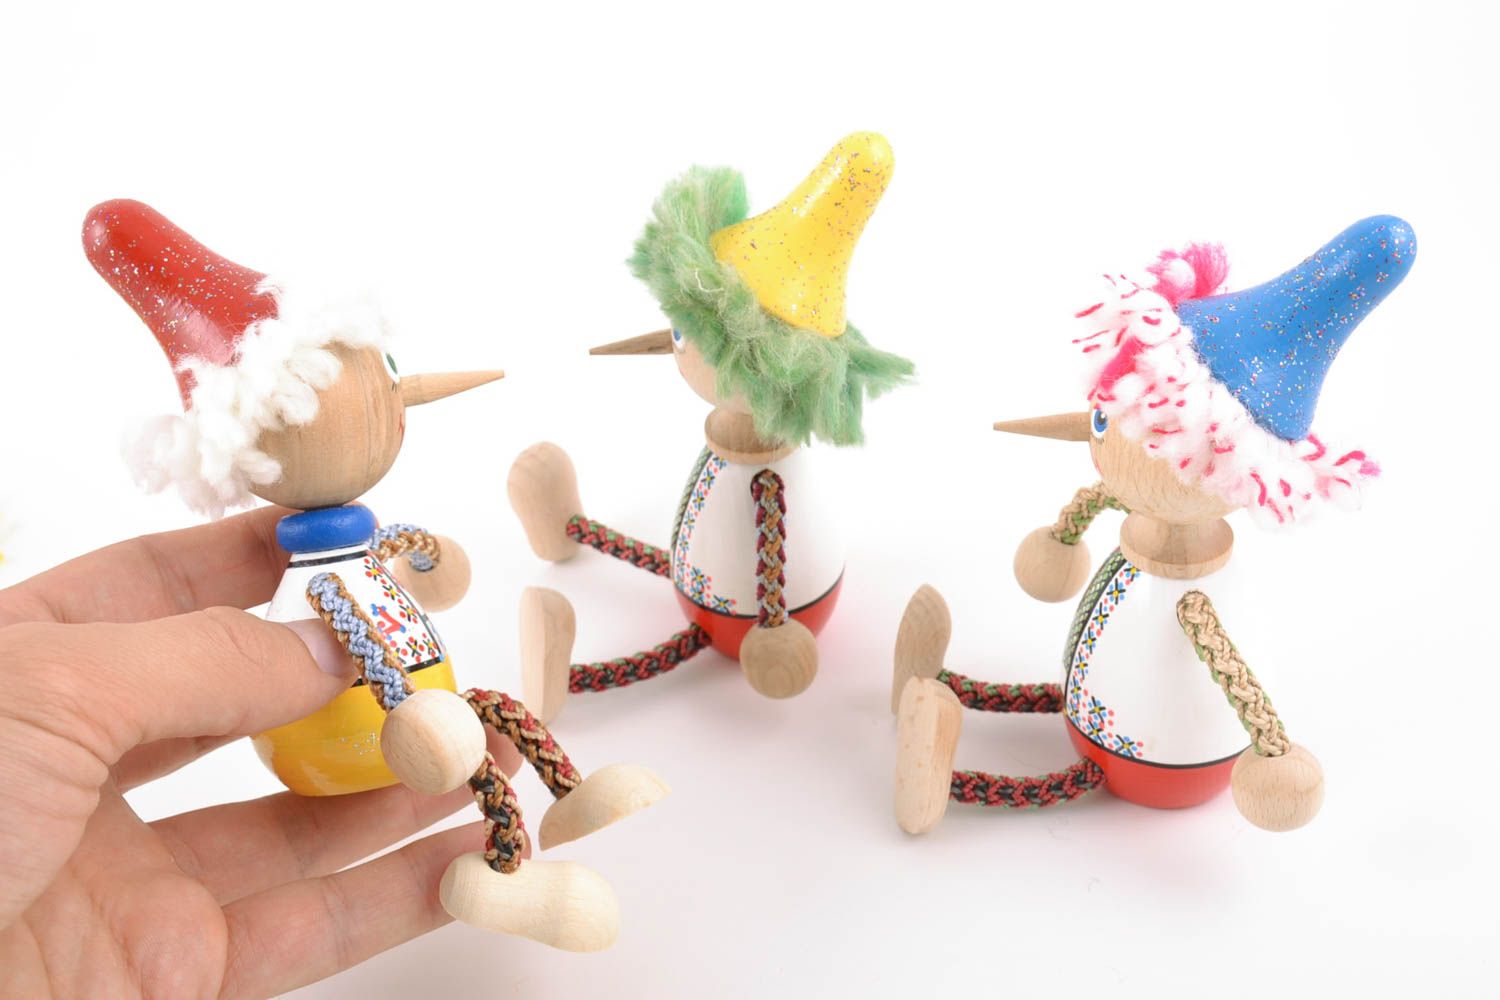 Small handmade wooden toys sey 3 pieces for children and home decor photo 2